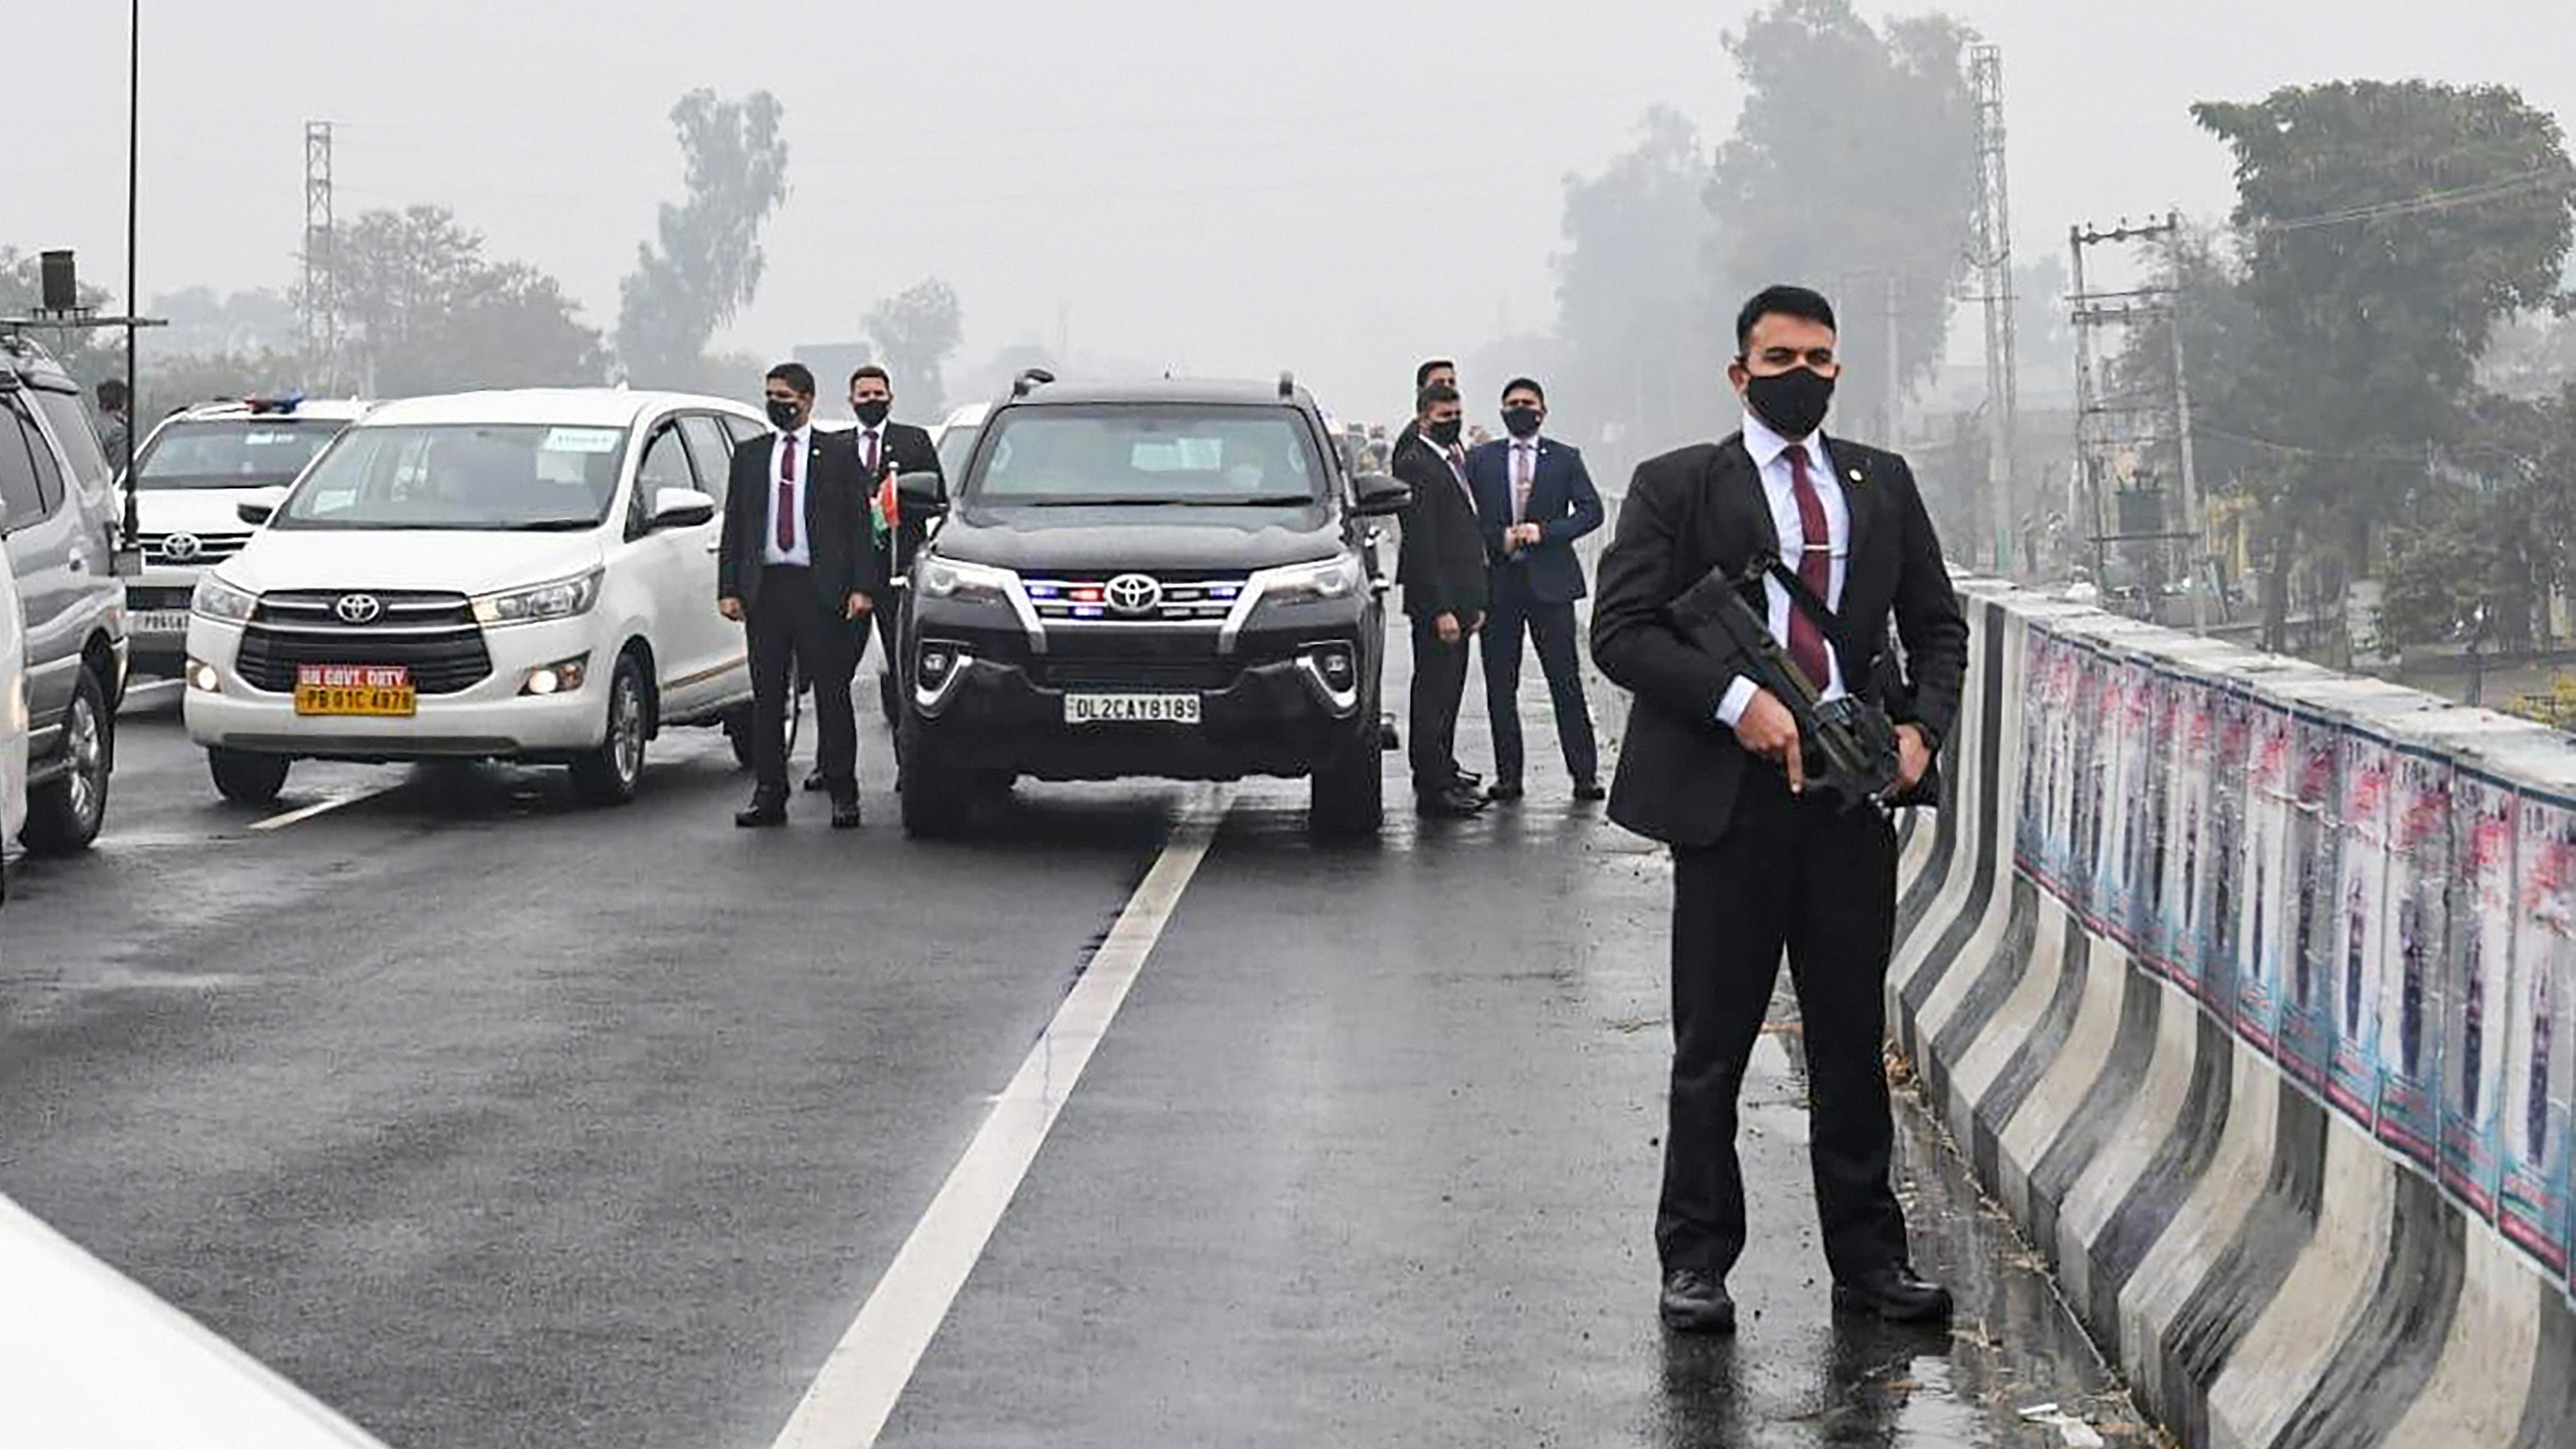 On Wednesday, Modi's convoy remained stranded on a flyover due to a blockade by protesters in Ferozepur. The incident forced the PM to cancel his rally and other events planned in poll-bound Punjab. Credit: PTI File Photo